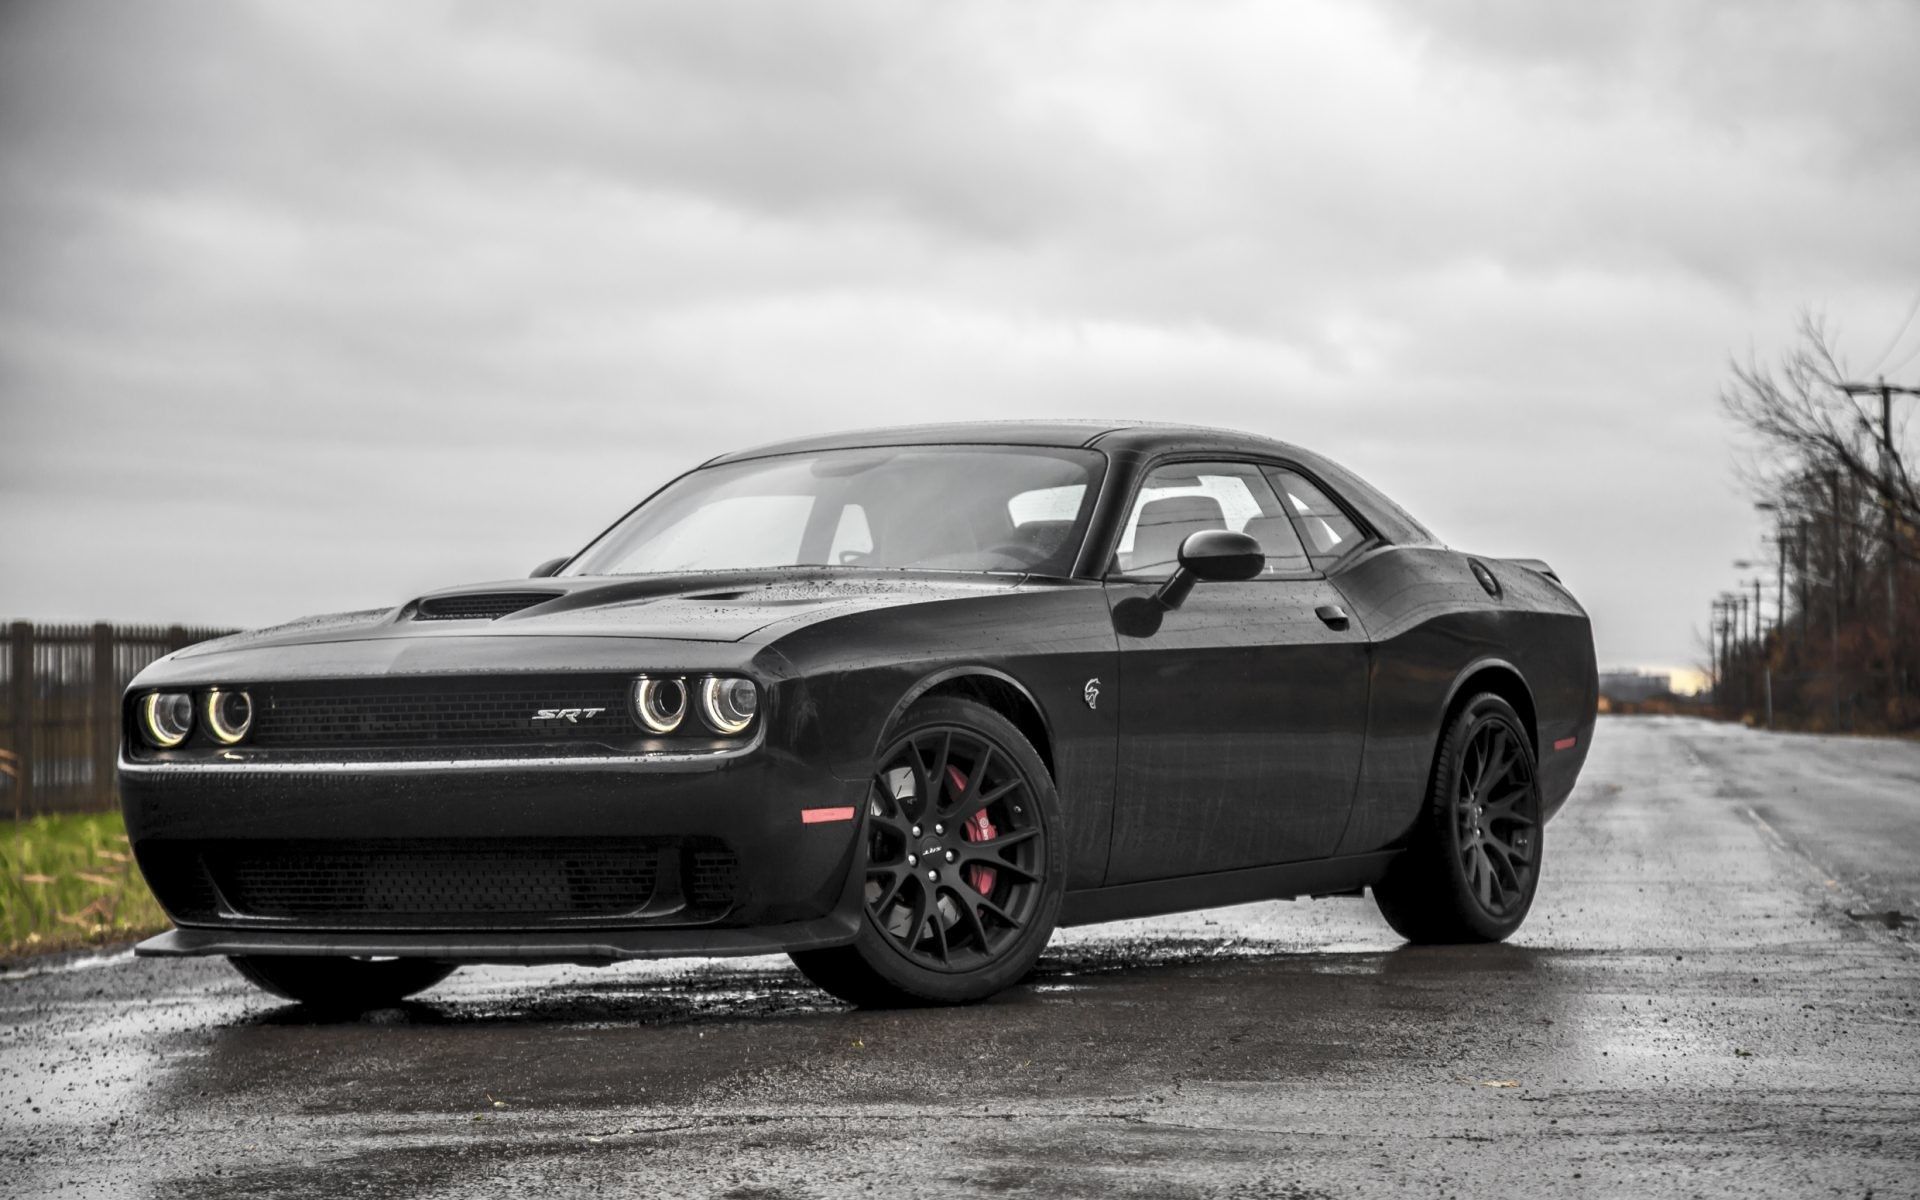 1920x1200 Dodge Challenger Hellcat Specs And 4k Uhd Car Wallpaper Dodge Challenger Srt Black Hd Wallpaper Background Download